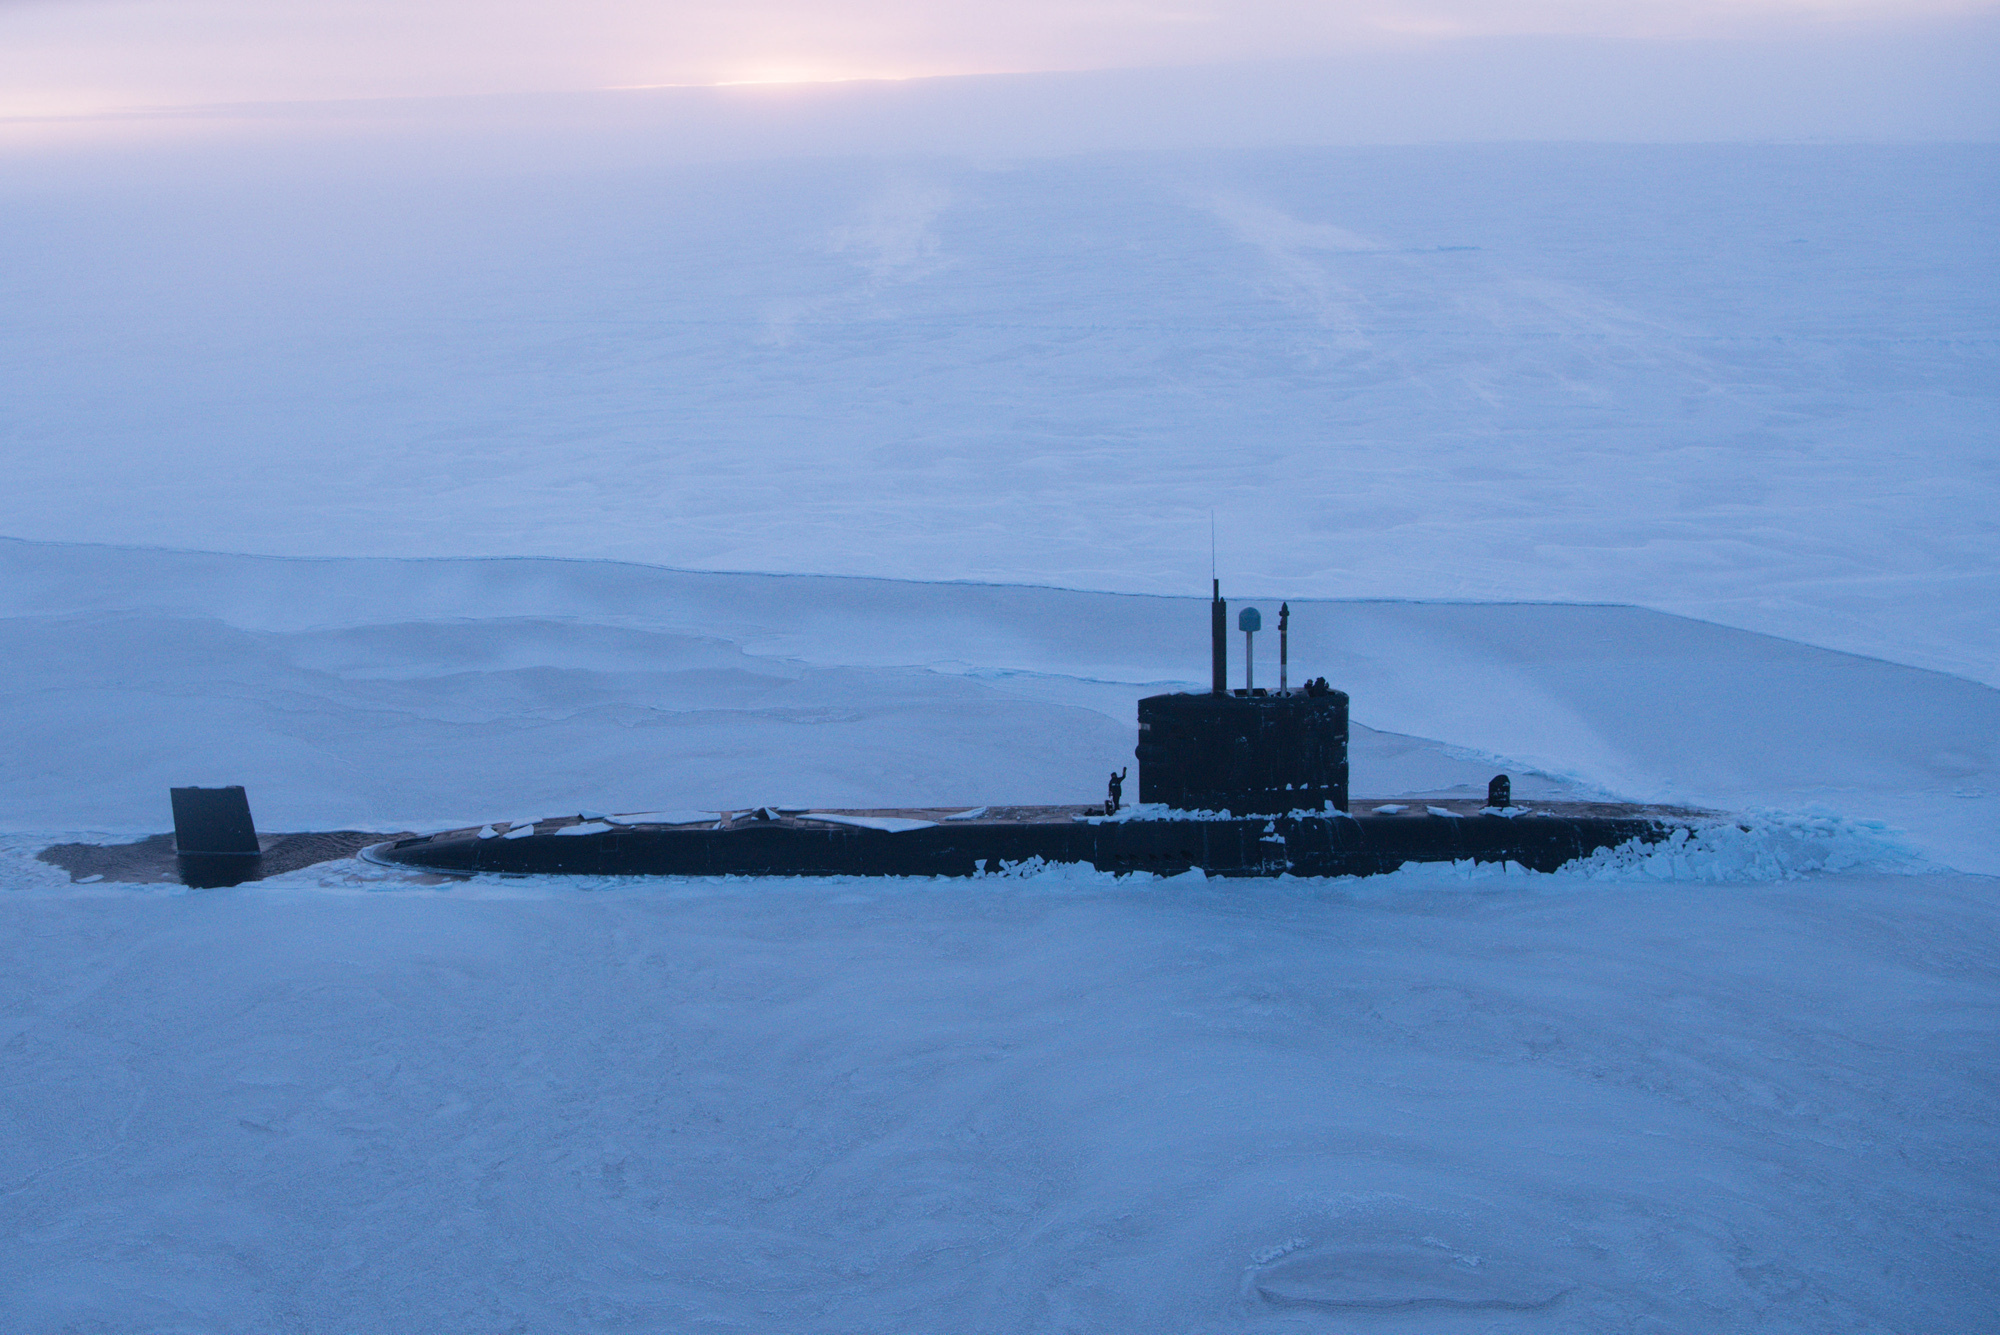 HMS Trenchant breaking through the metre-thick ice of the Arctic Ocean (Cdr Charles Ball/Royal Navy/PA Wire)